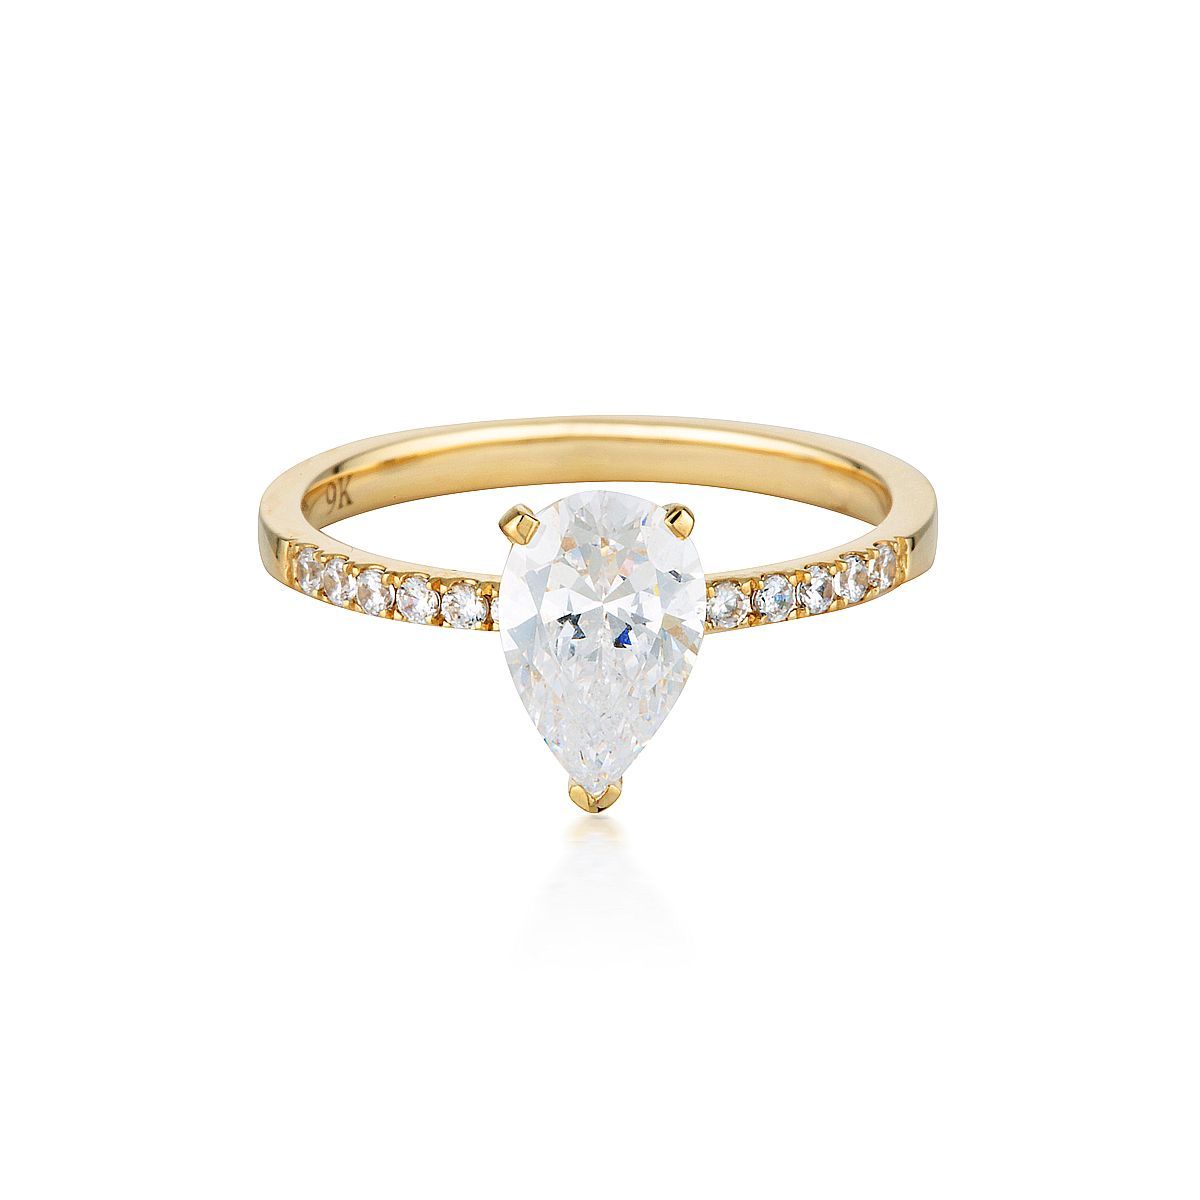 Georgini - Pear Cut And Round Brilliant 1.5Ct Cubic Zirconia Engagement Ring In 9Ct Yellow Gold